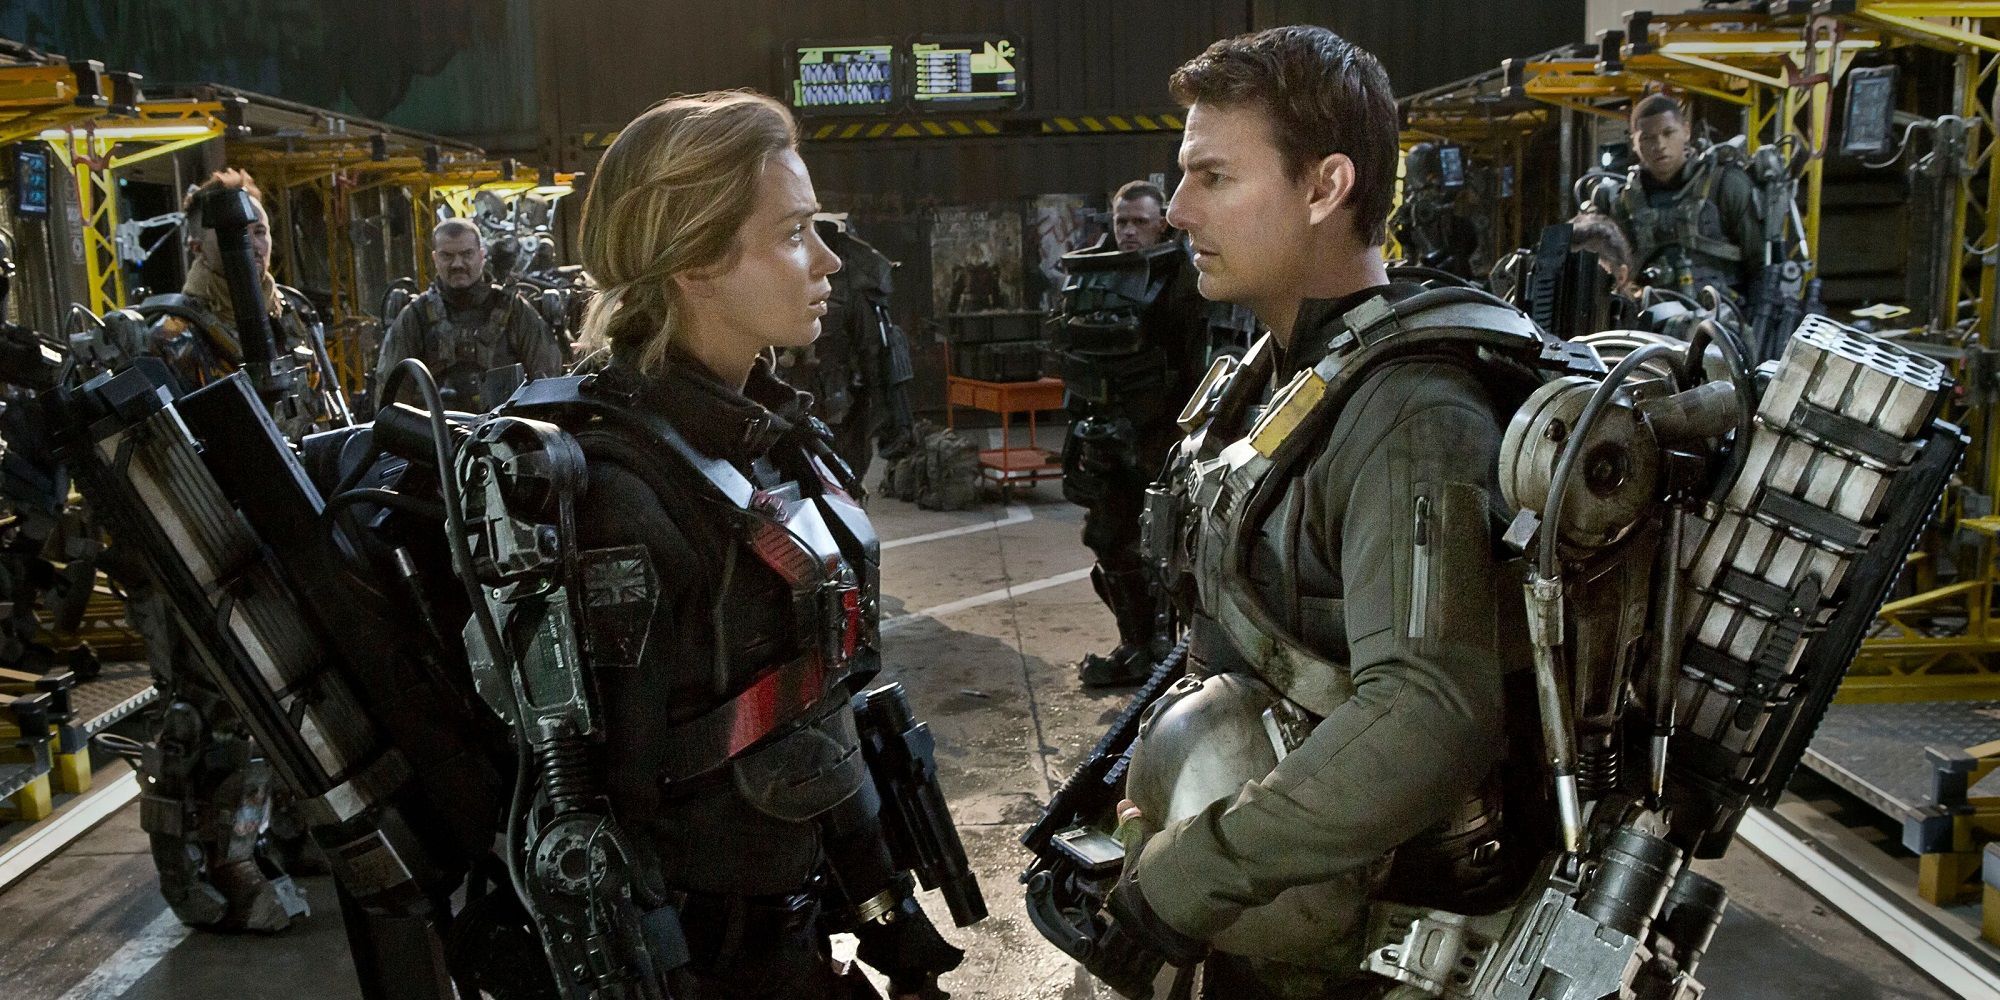 Rita and Ron facing each other in Edge of Tomorrow